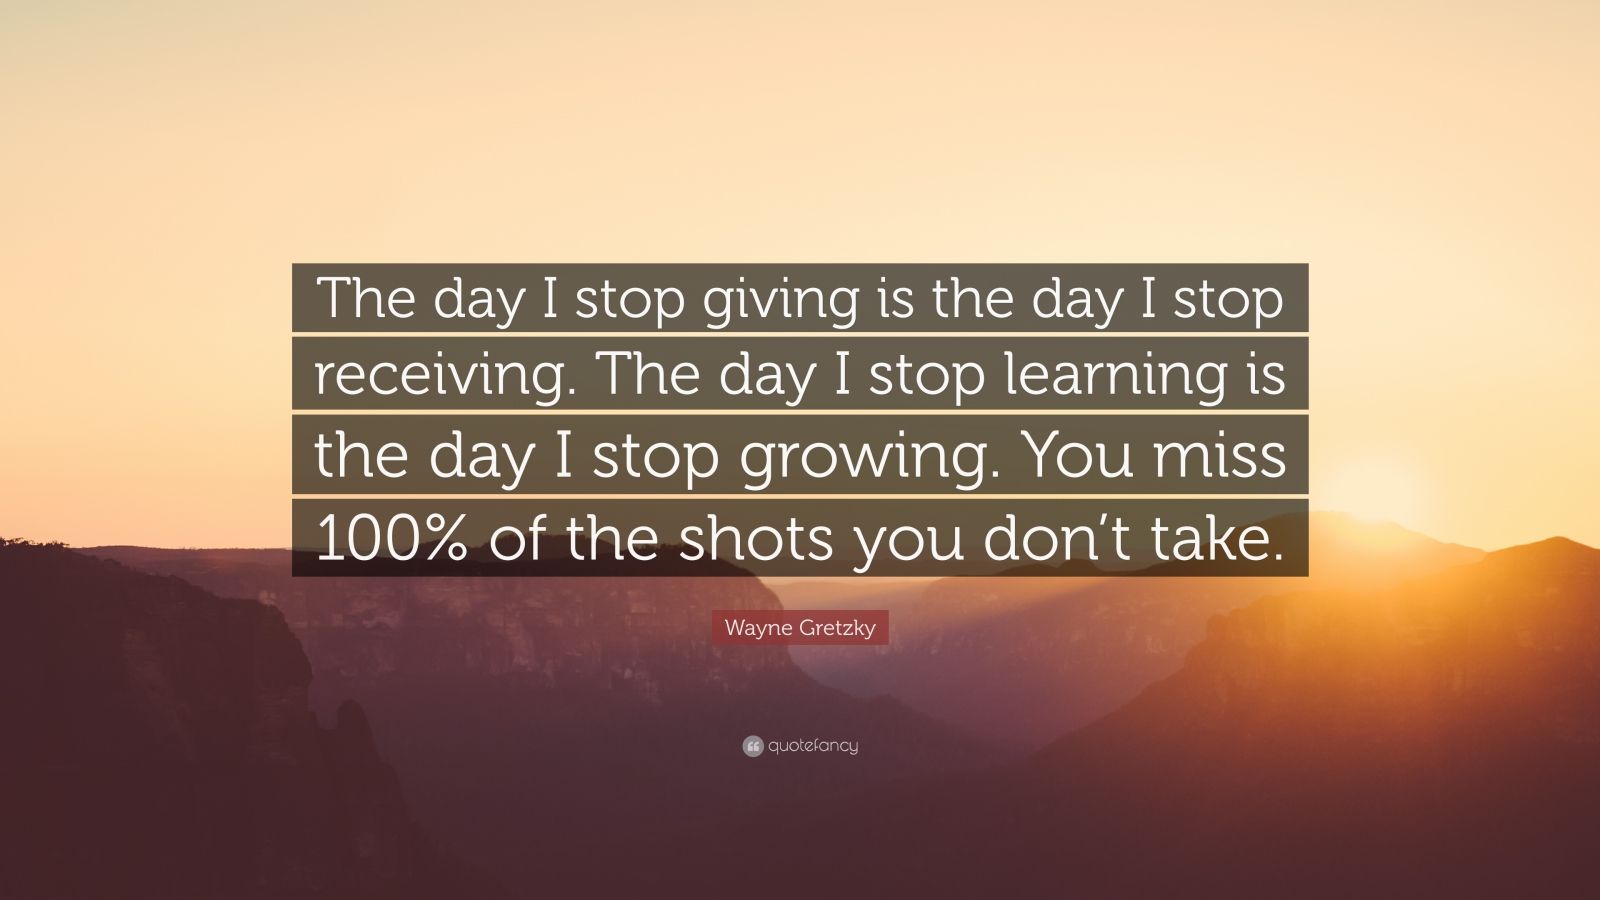 2275438 Wayne Gretzky Quote The day I stop giving is the day I stop